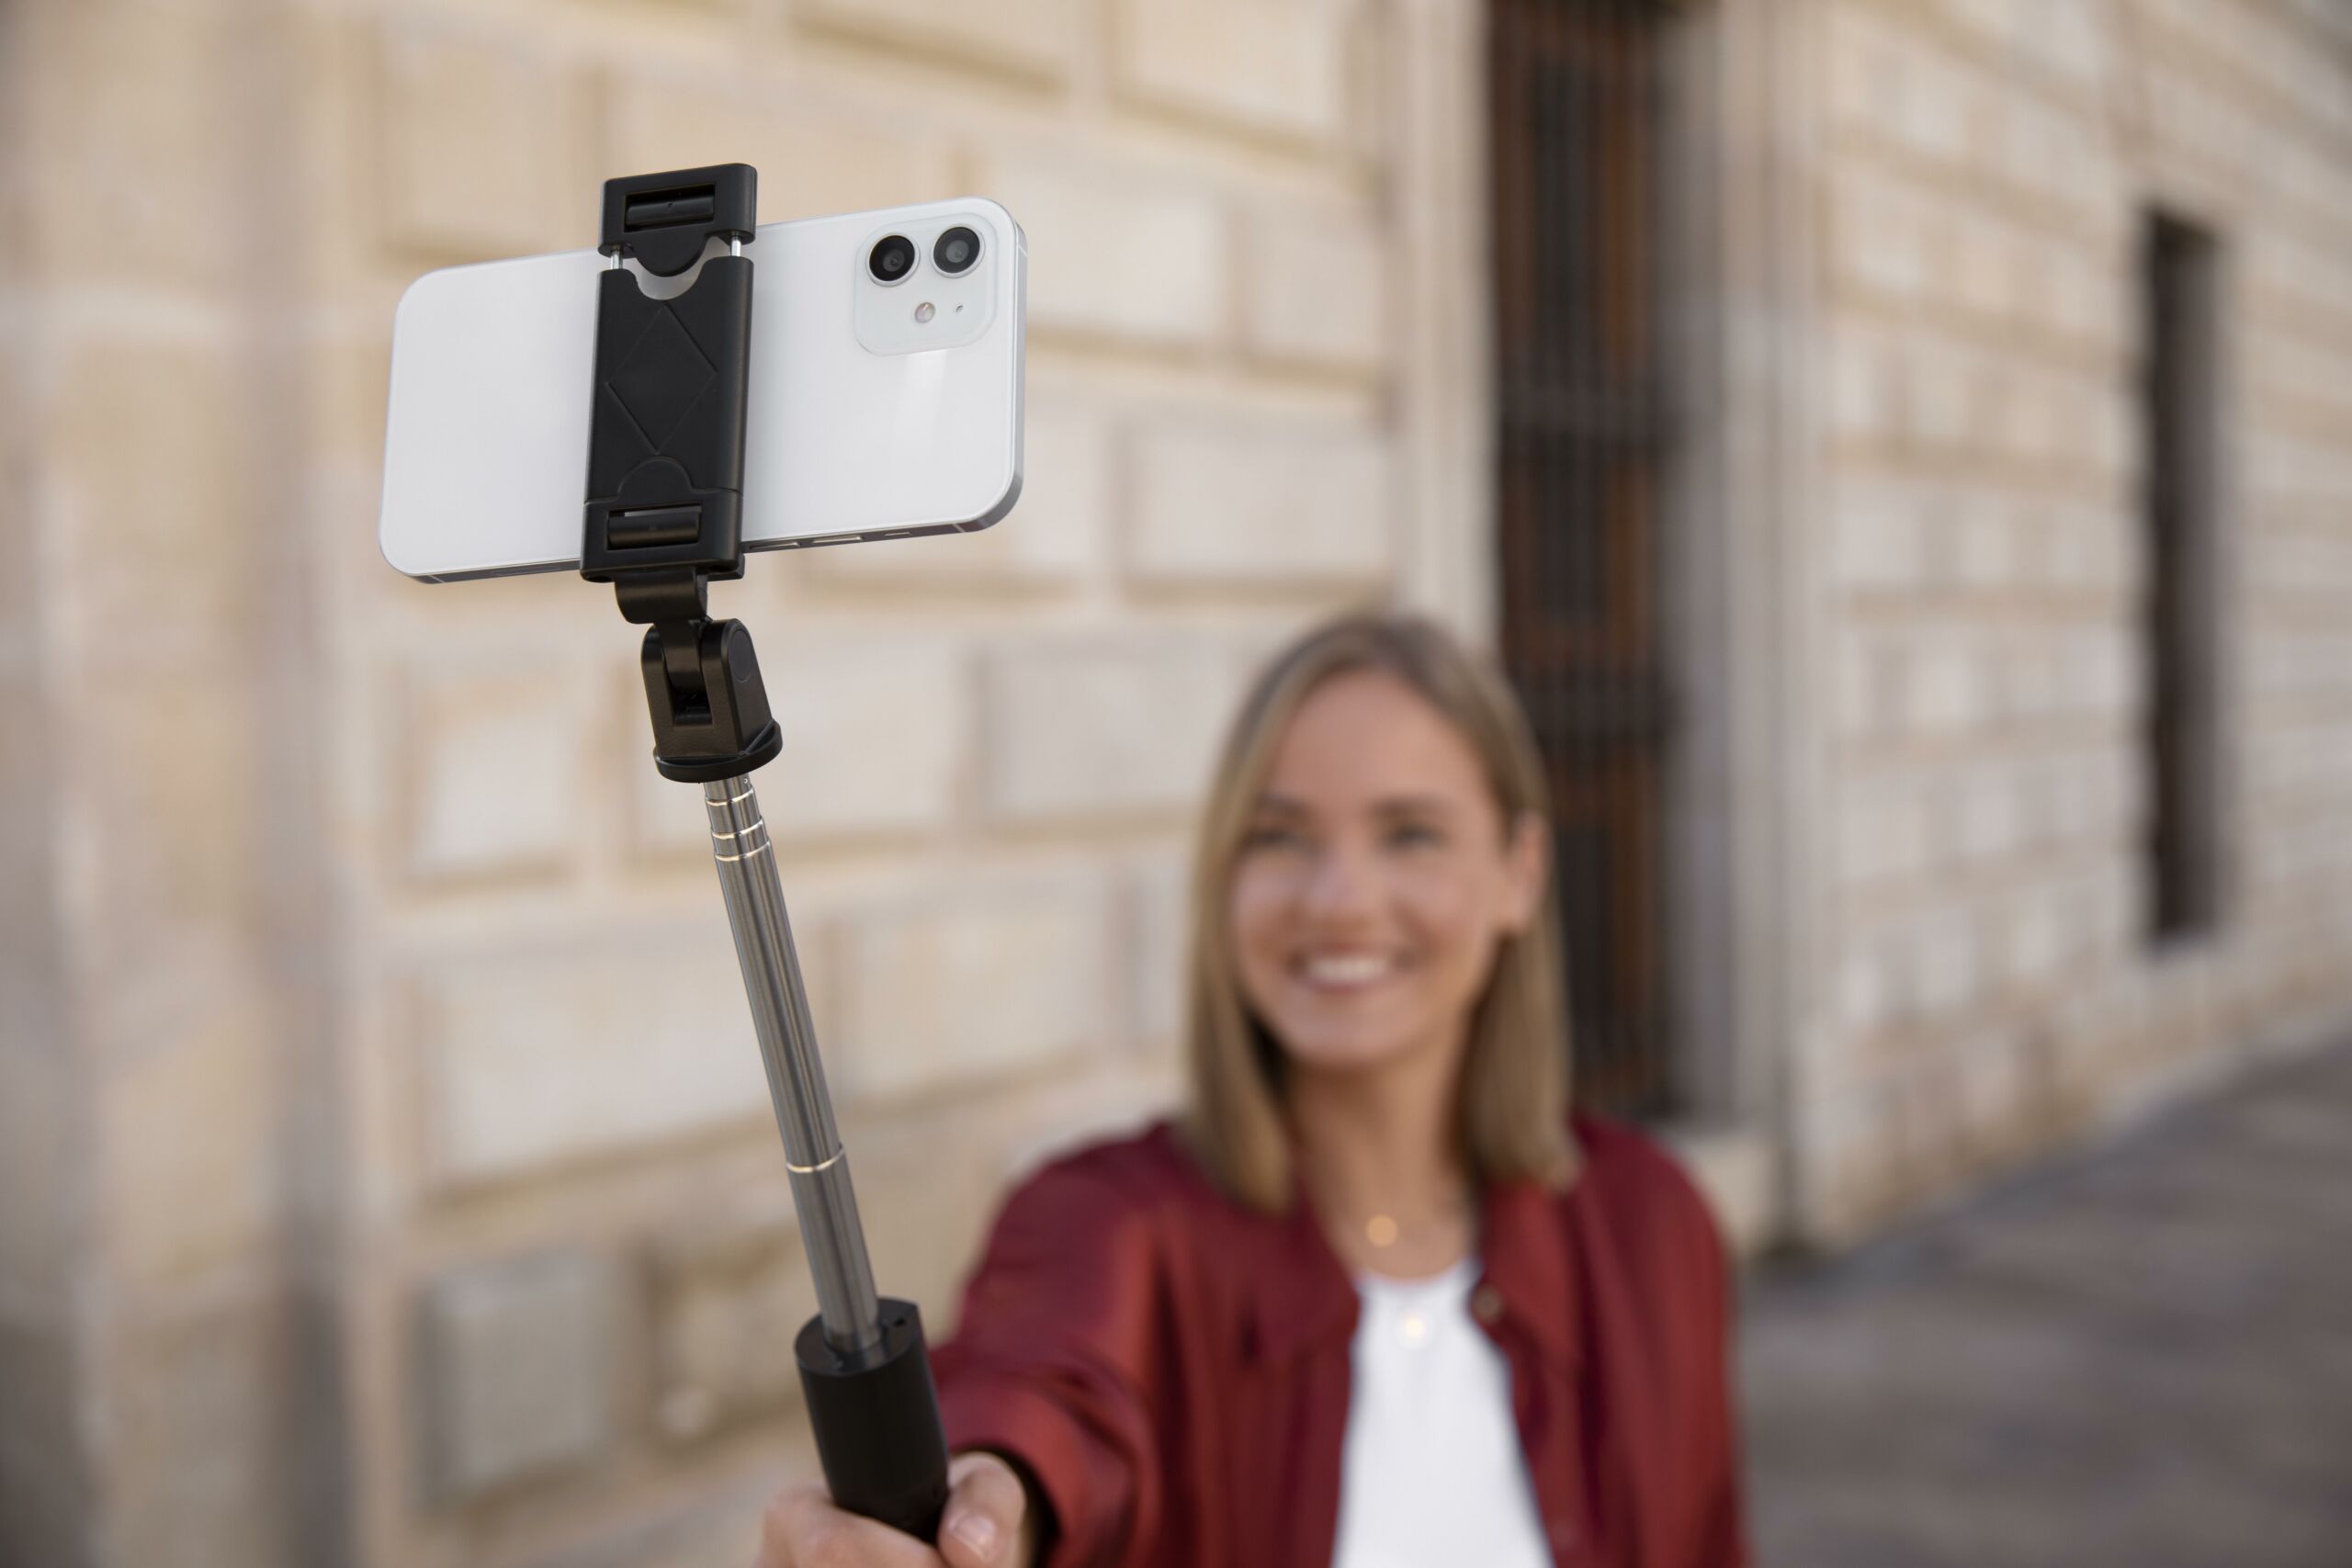 A phone gimbal. A woman holding a smartphone gimbal and filming herself on the street.